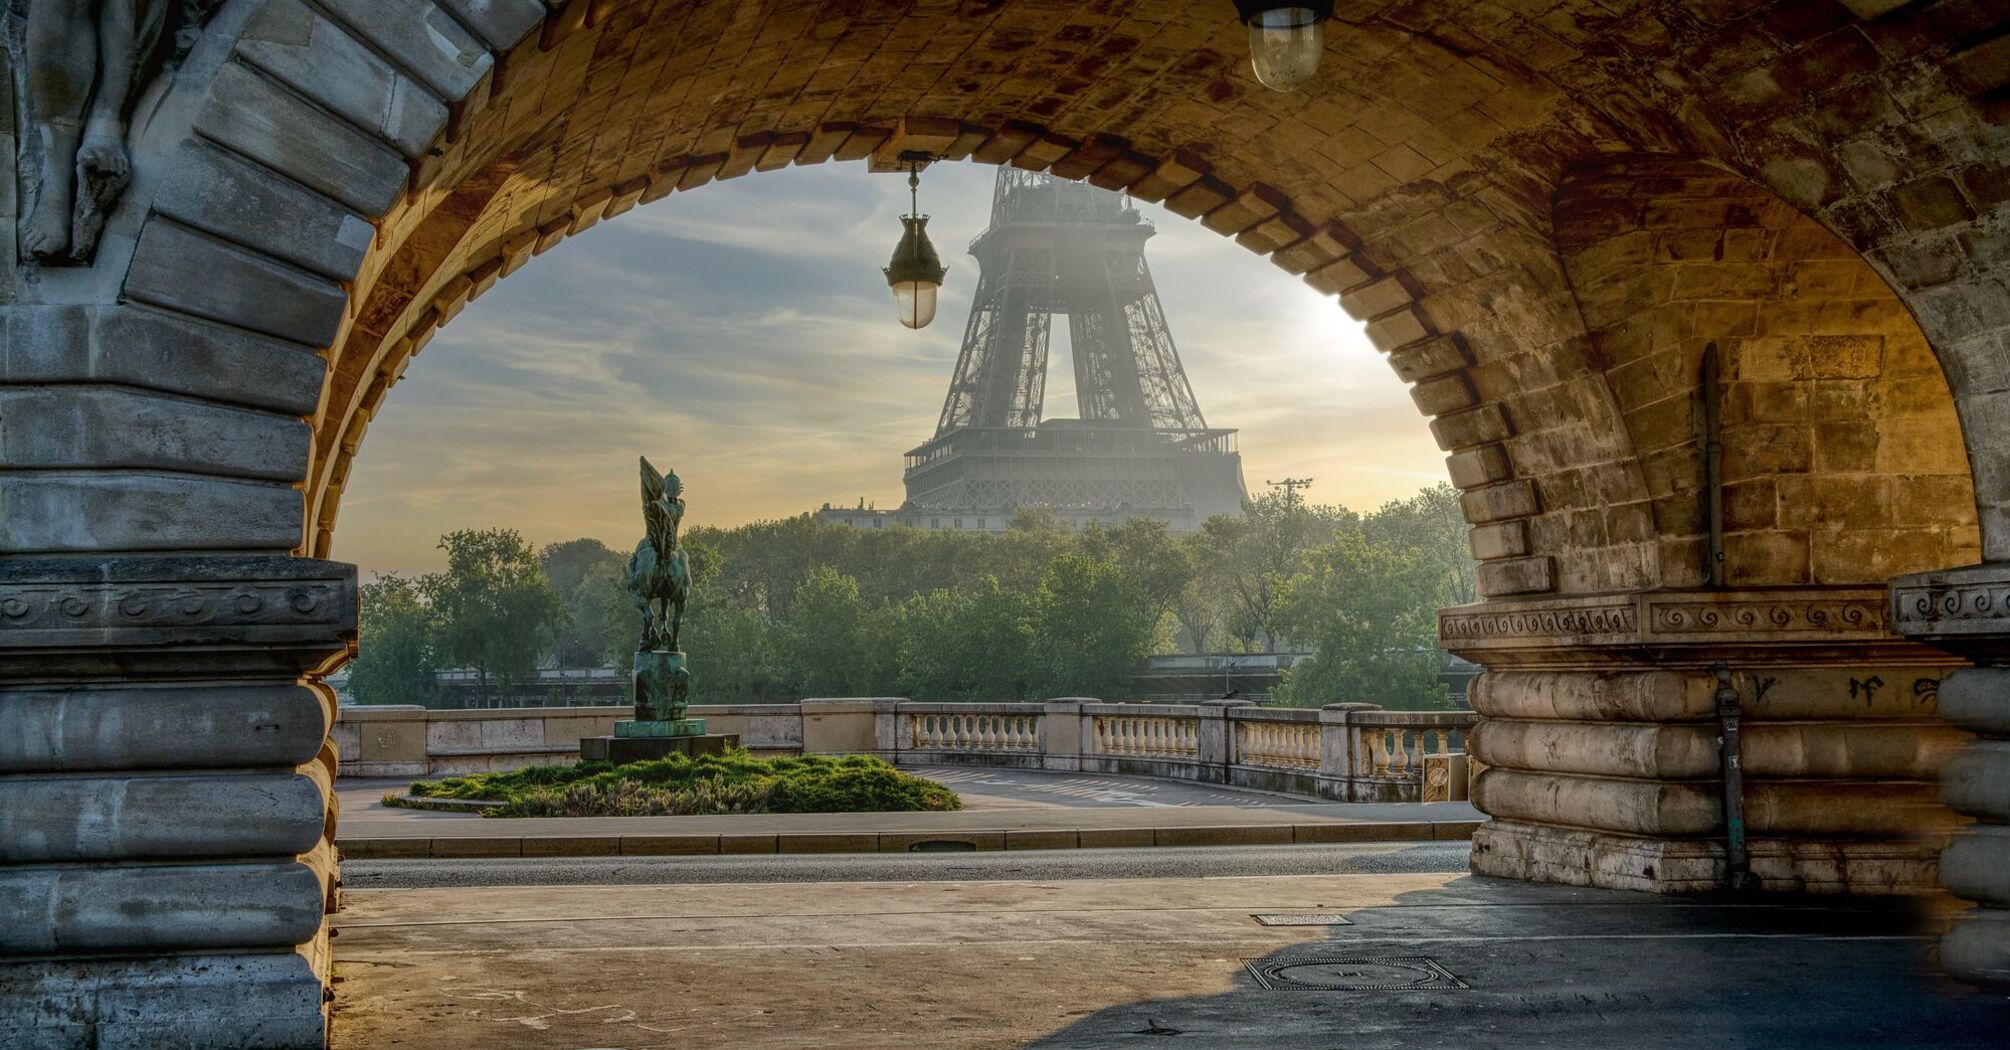 Not only Olympics: How France can surprise tourists this year